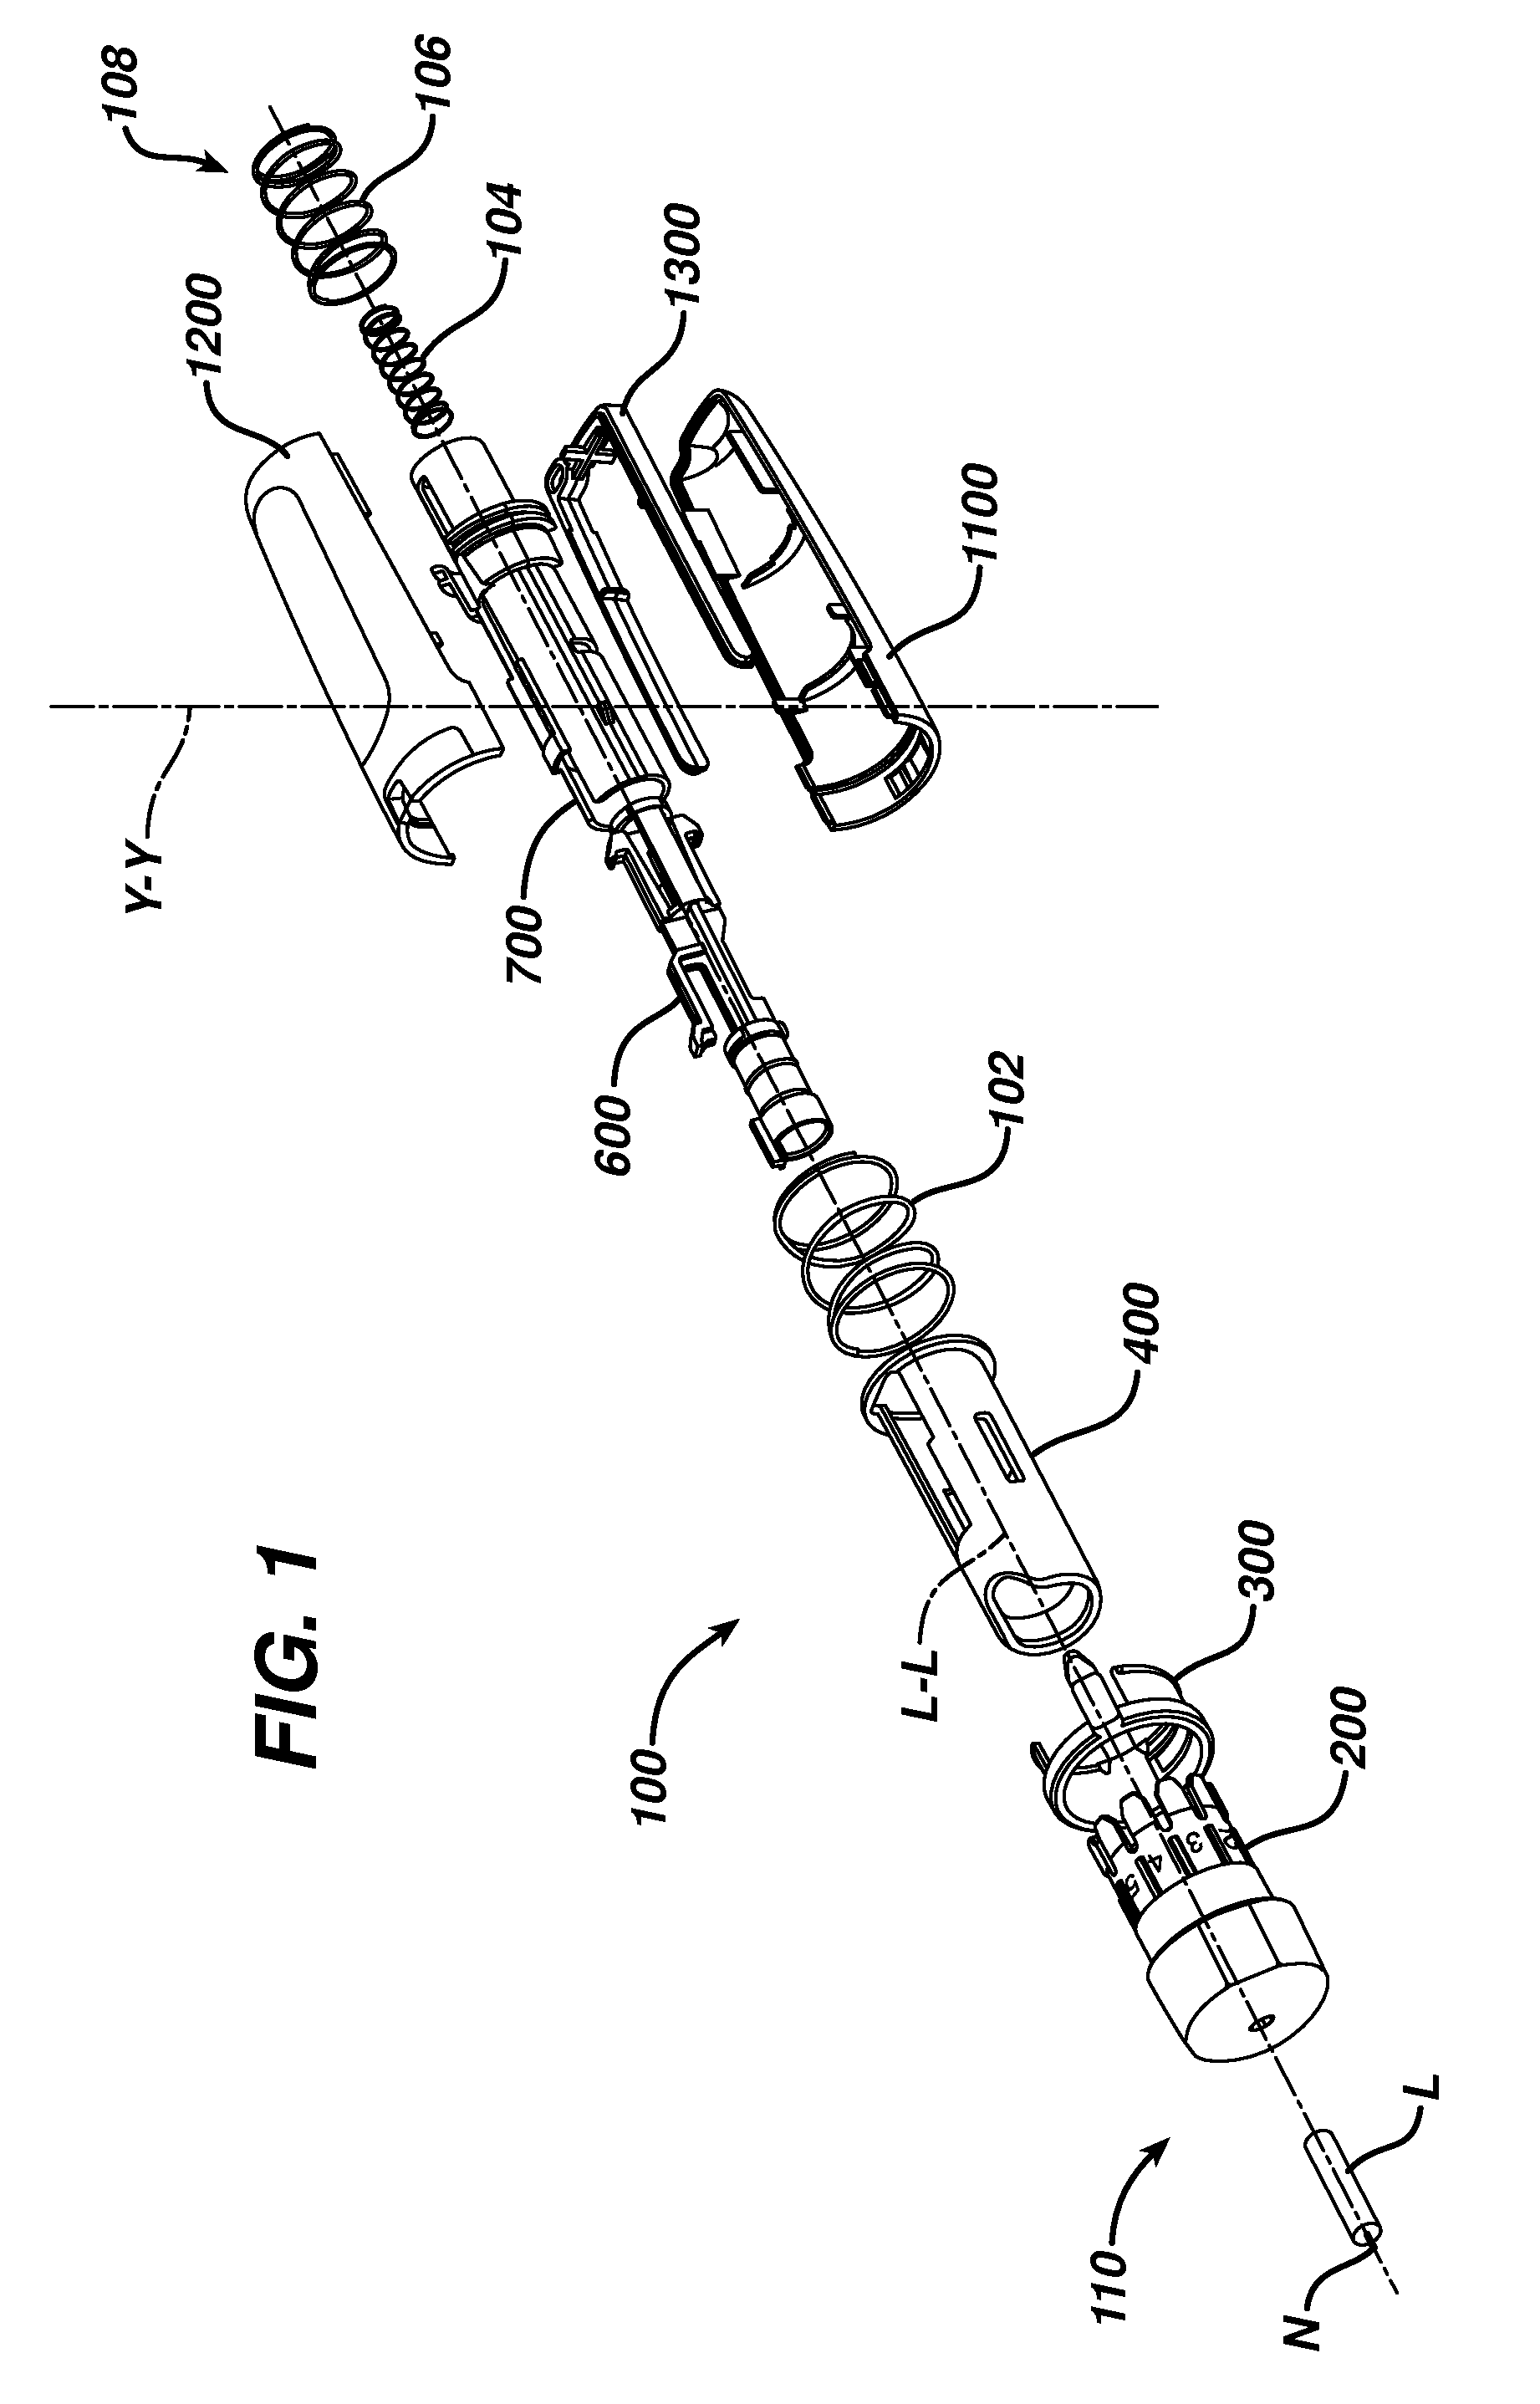 Lancing devices and methods